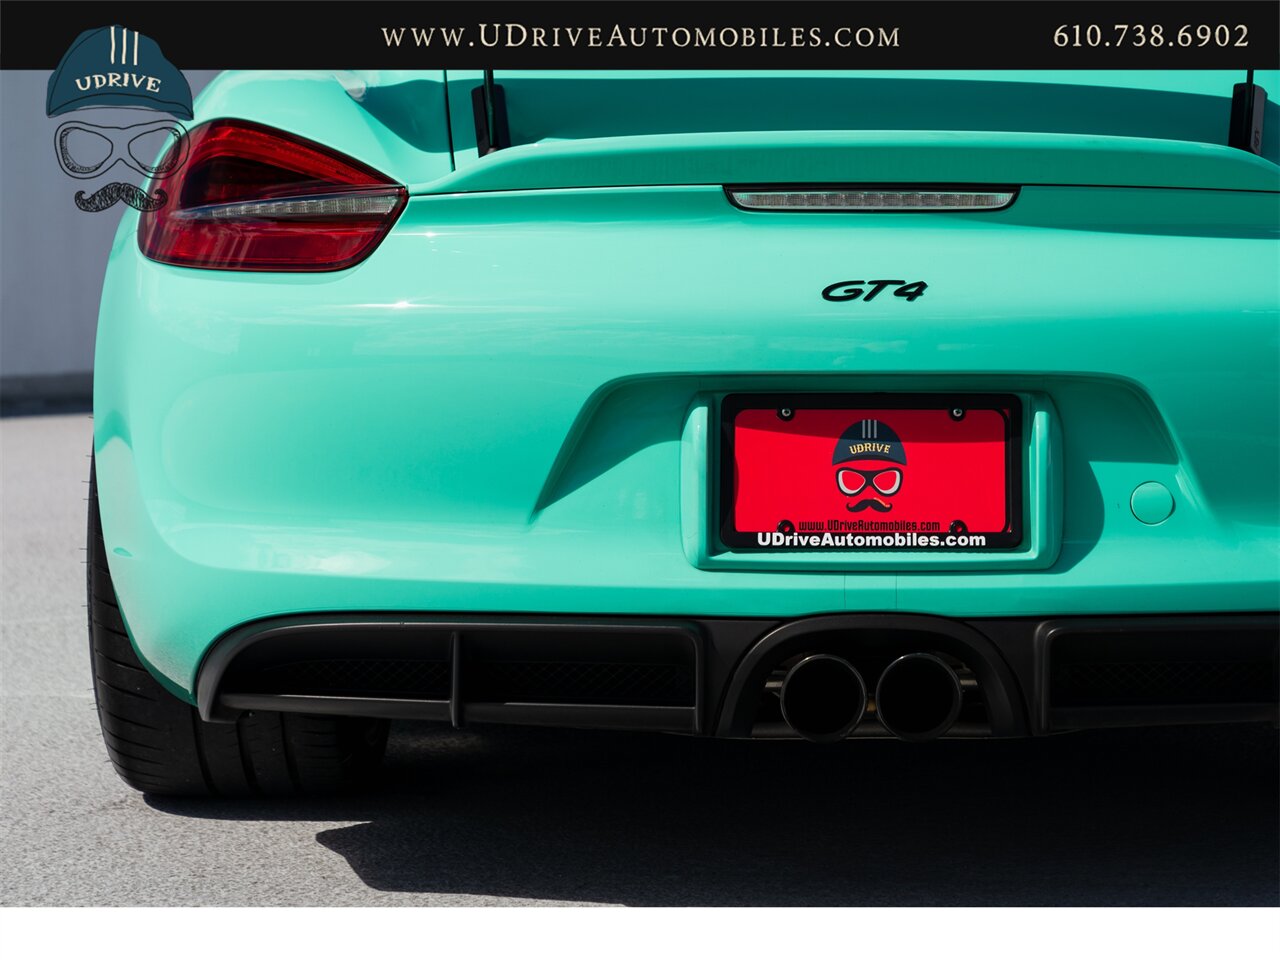 2016 Porsche Cayman GT4  PTS Mint Green 1 of 2 PCCB Bucket Seats PPF - Photo 23 - West Chester, PA 19382